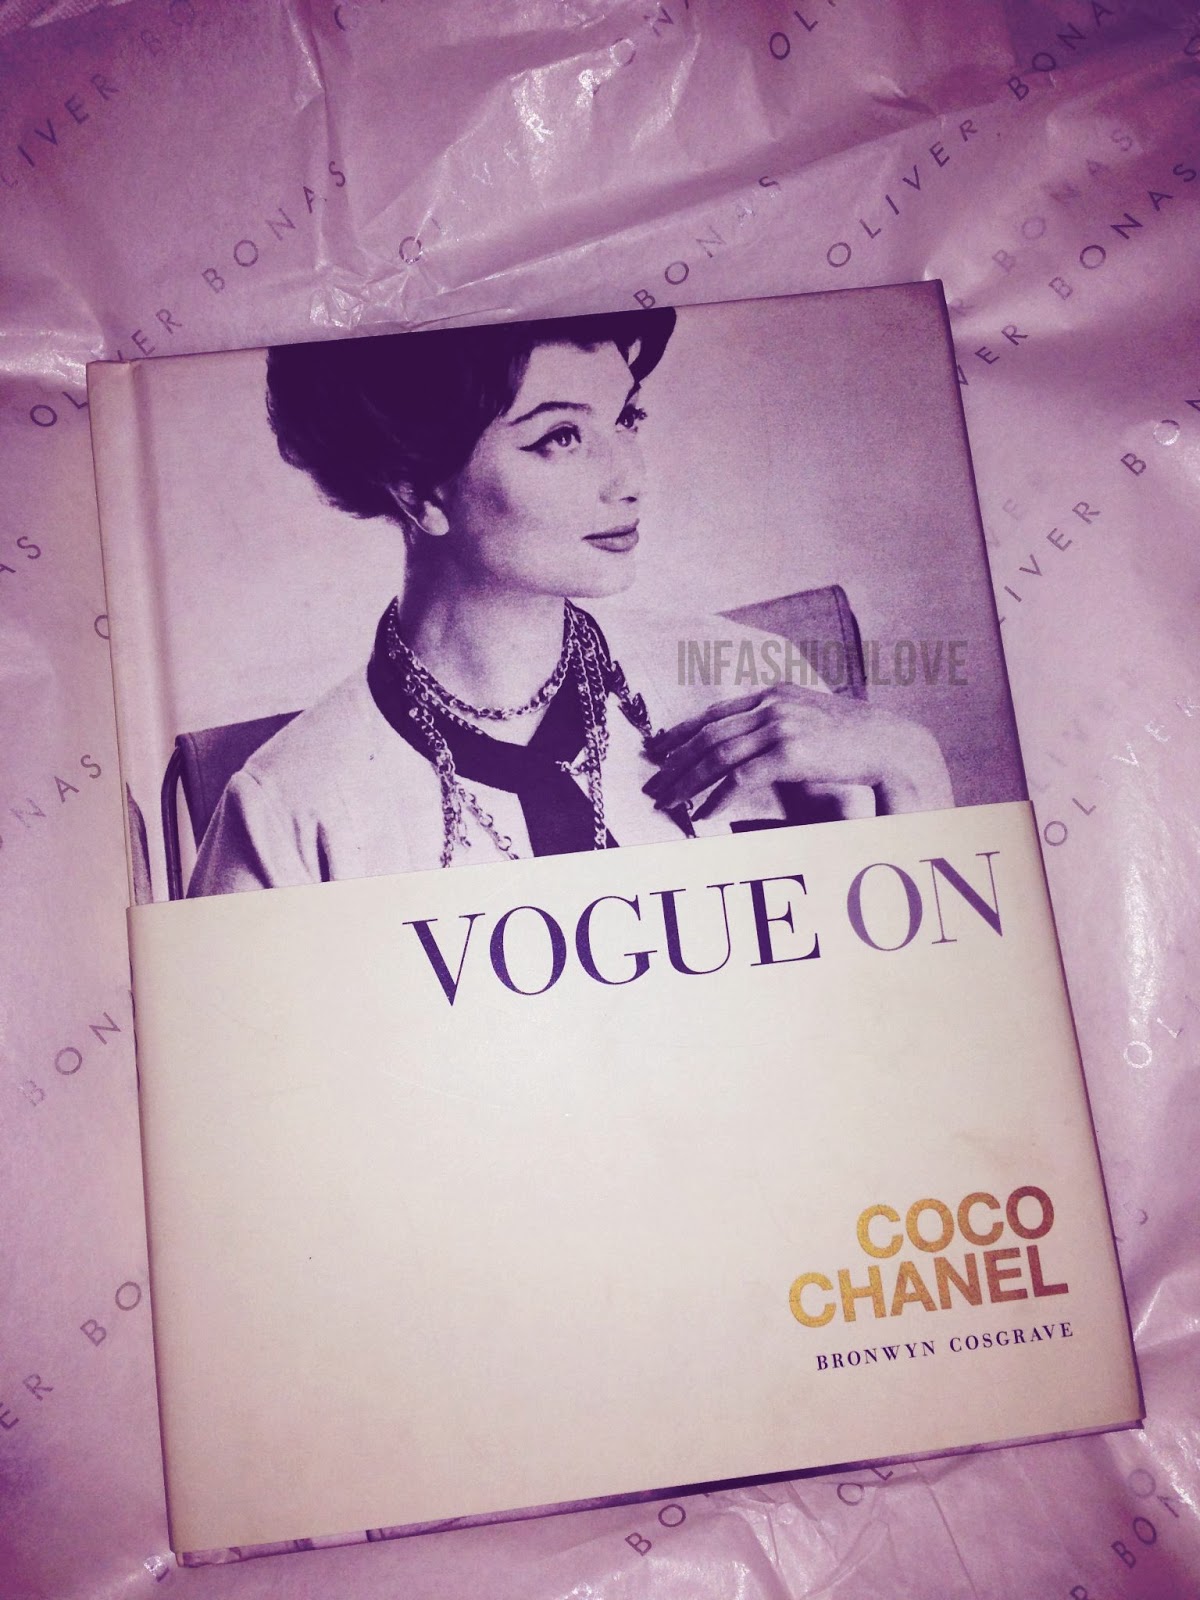  Book Review: Vogue on Coco Chanel by Bronwyn Cosgrave!